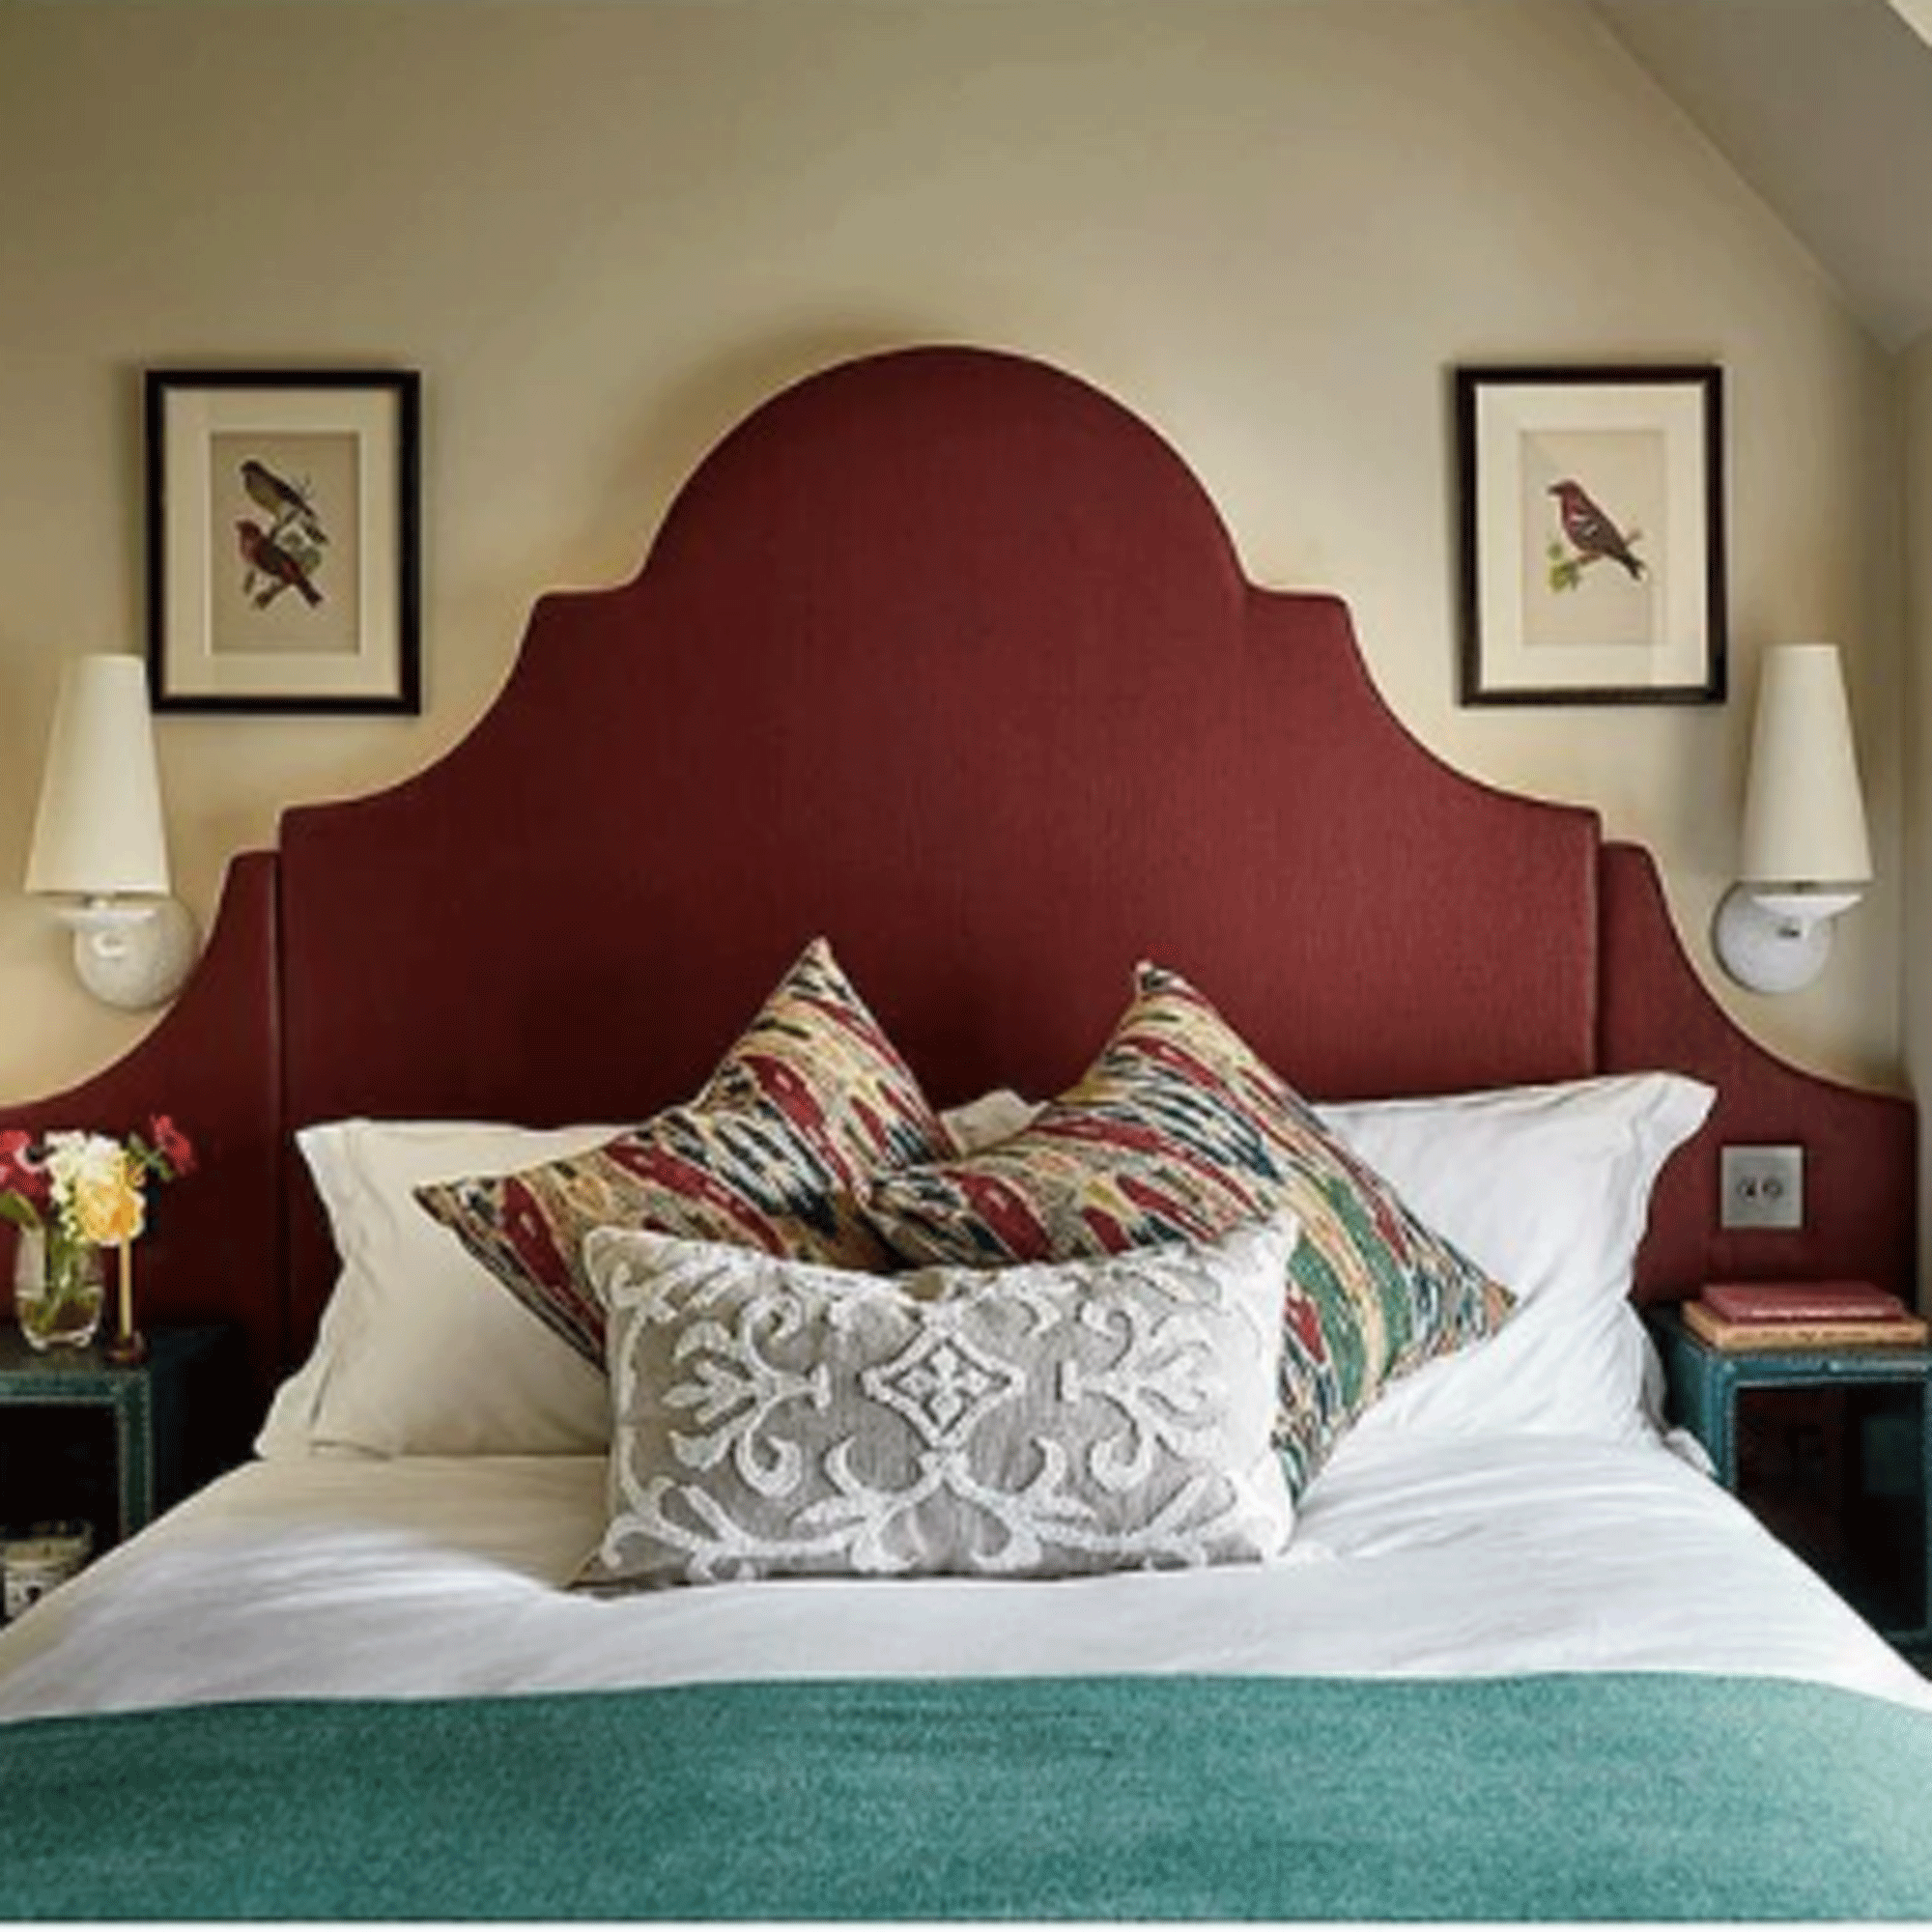 Bedroom with red headboard and teal throw